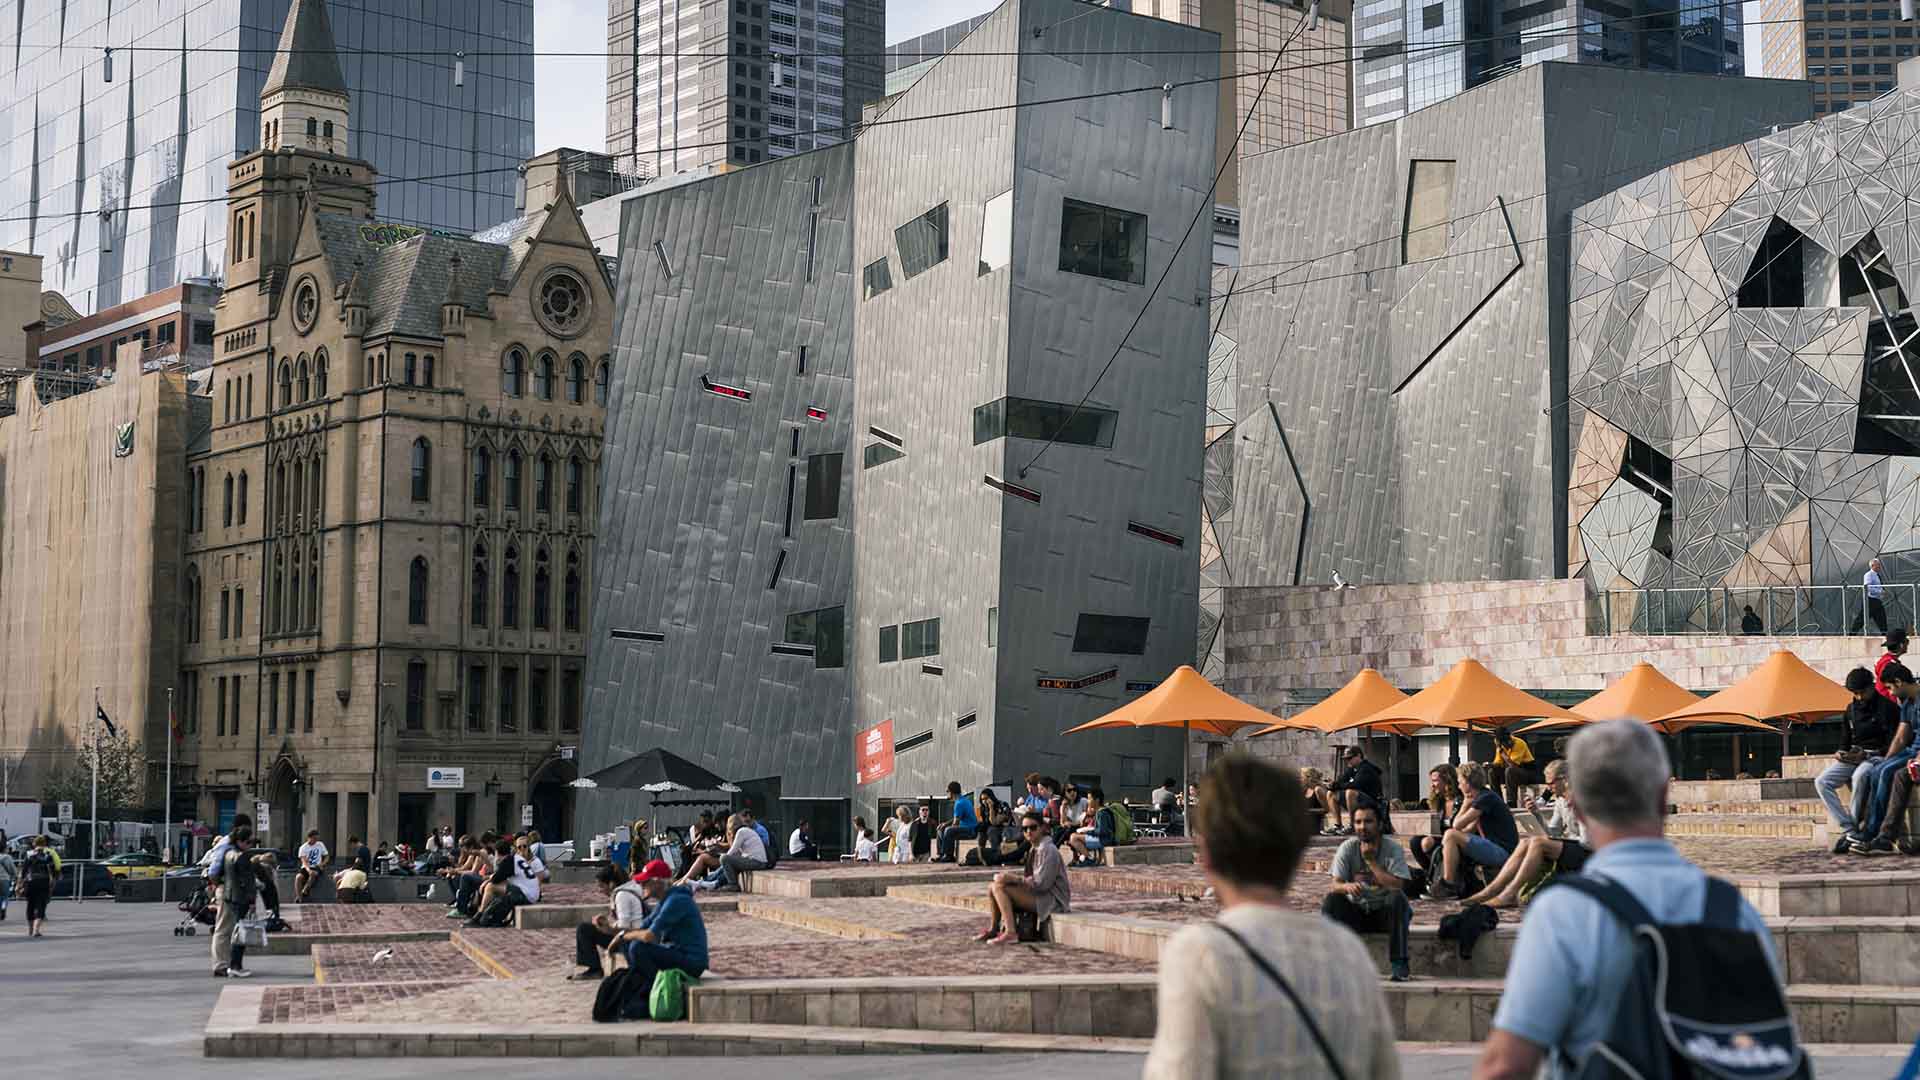 Federation Square Could Soon Be Home to a New $15 Million Public Library